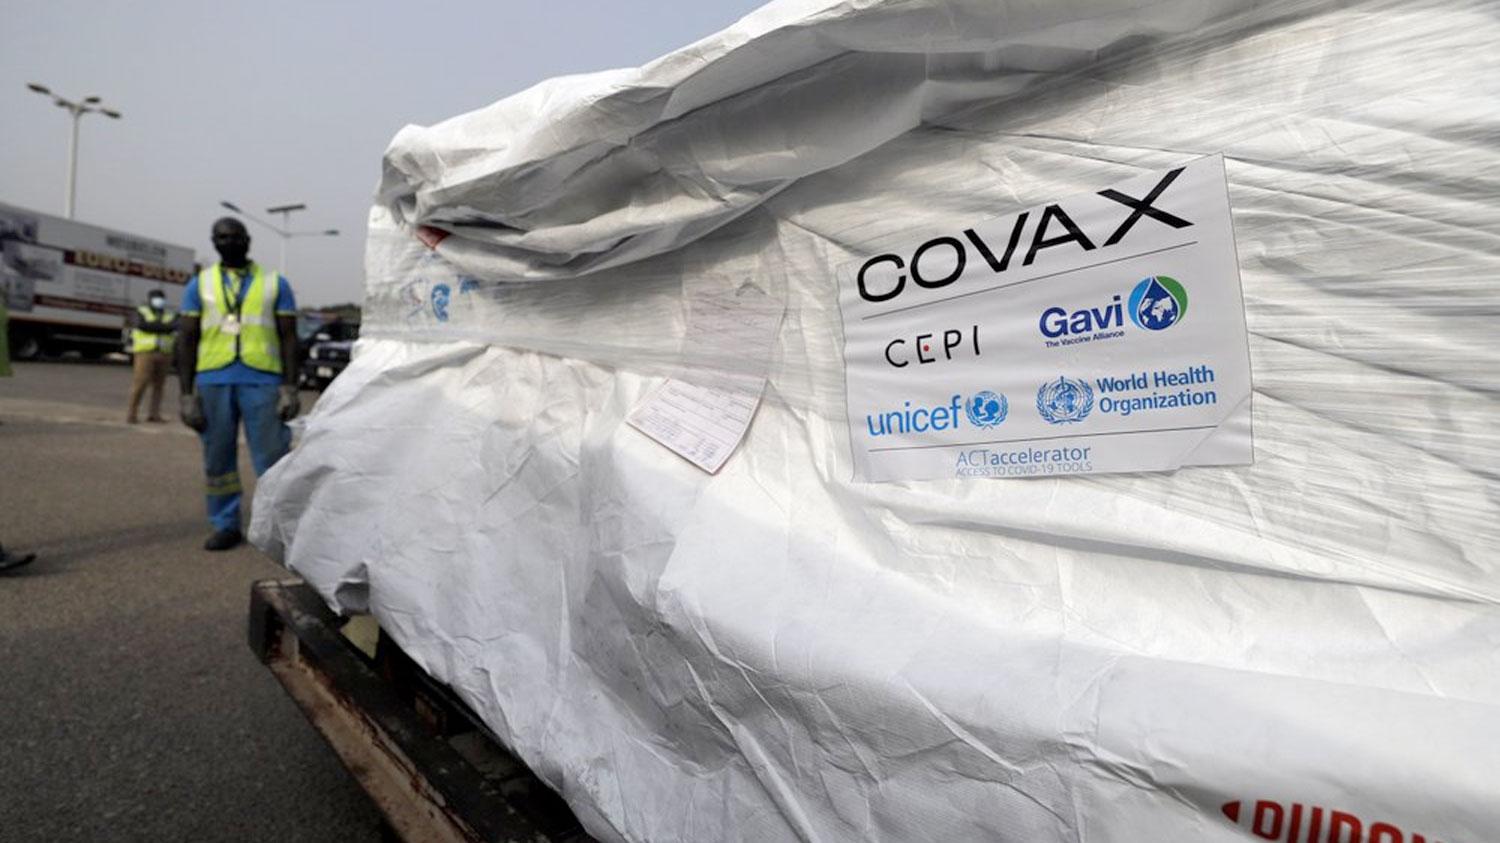 A large pallet is shown covered in a white wrapping with the logo for COVAX posted on the side.